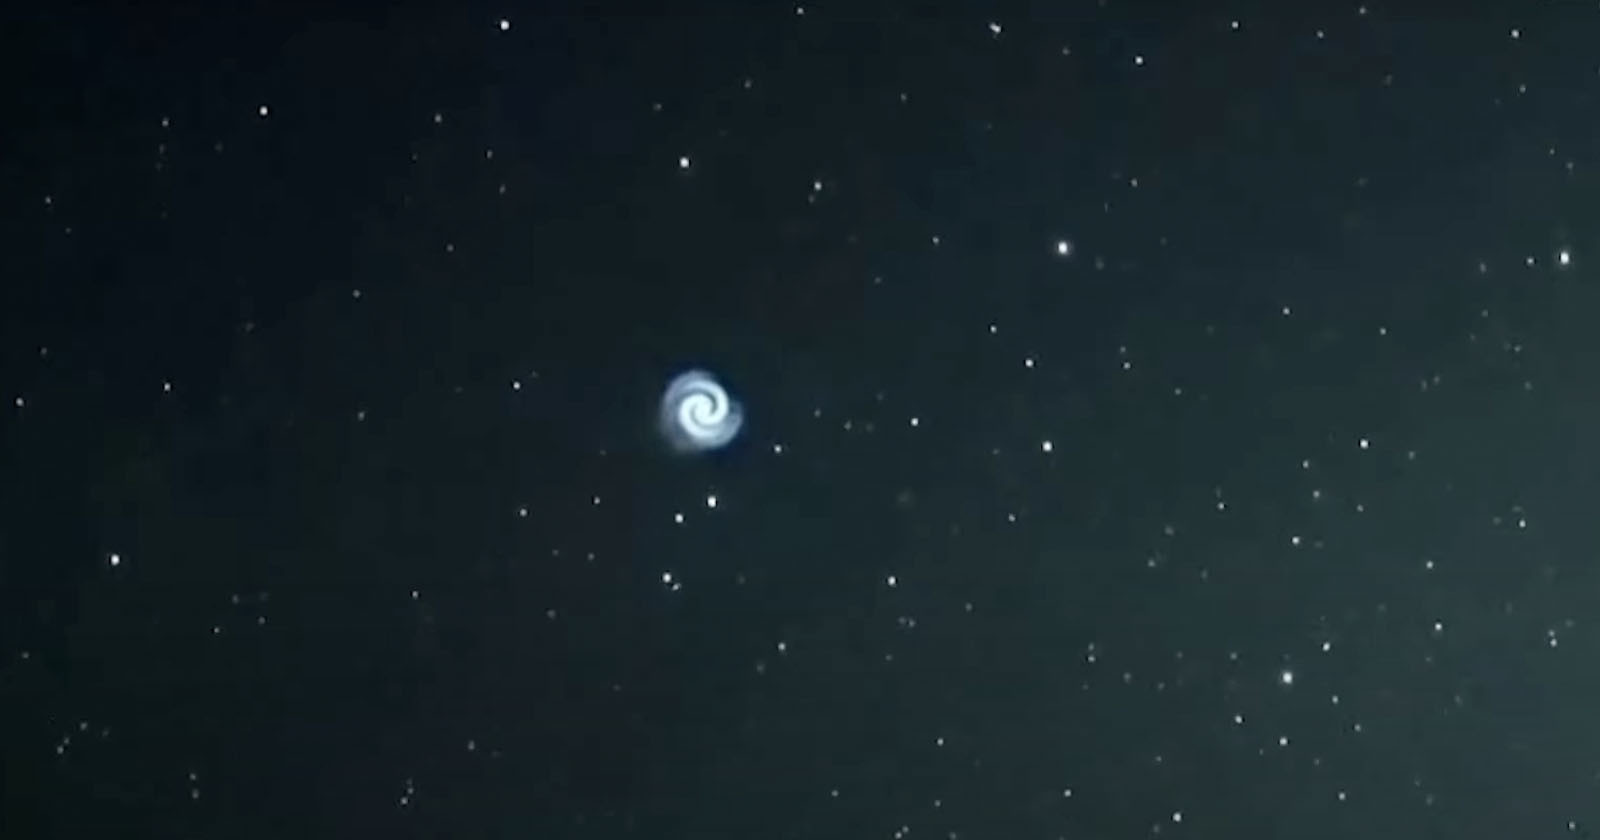  telescope camera captures mysterious swirling whirlpool 